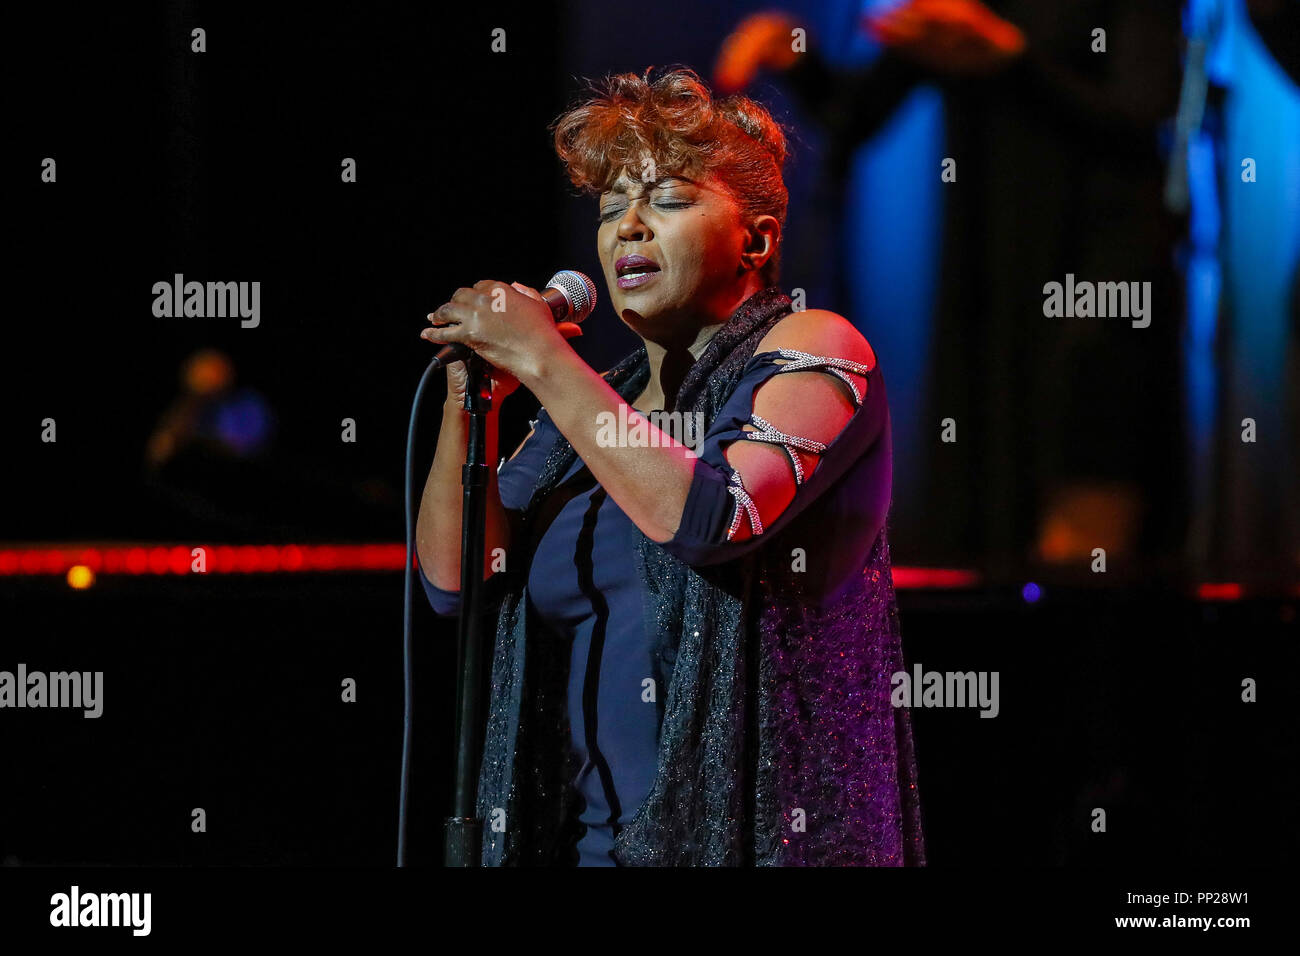 Music Artist ANITA BAKER performs in North Carolina as part of her 2018 Tour.  Anita Denise Baker is an American singer-songwriter. Baker has won eight  Grammy Awards and has five platinum albums